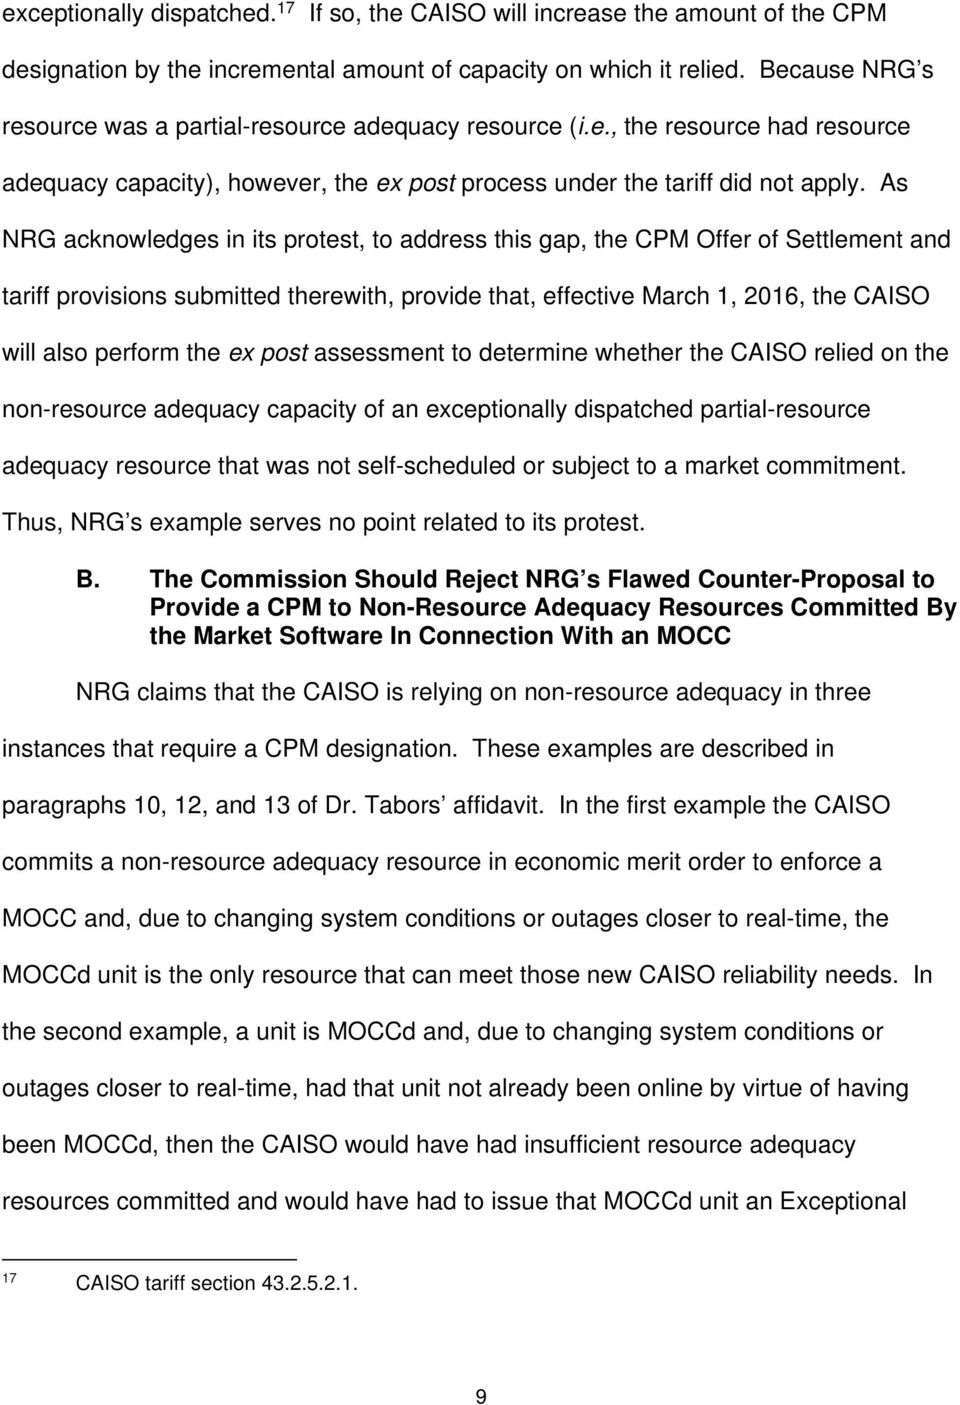 As NRG acknowledges in its protest, to address this gap, the CPM Offer of Settlement and tariff provisions submitted therewith, provide that, effective March 1, 2016, the CAISO will also perform the